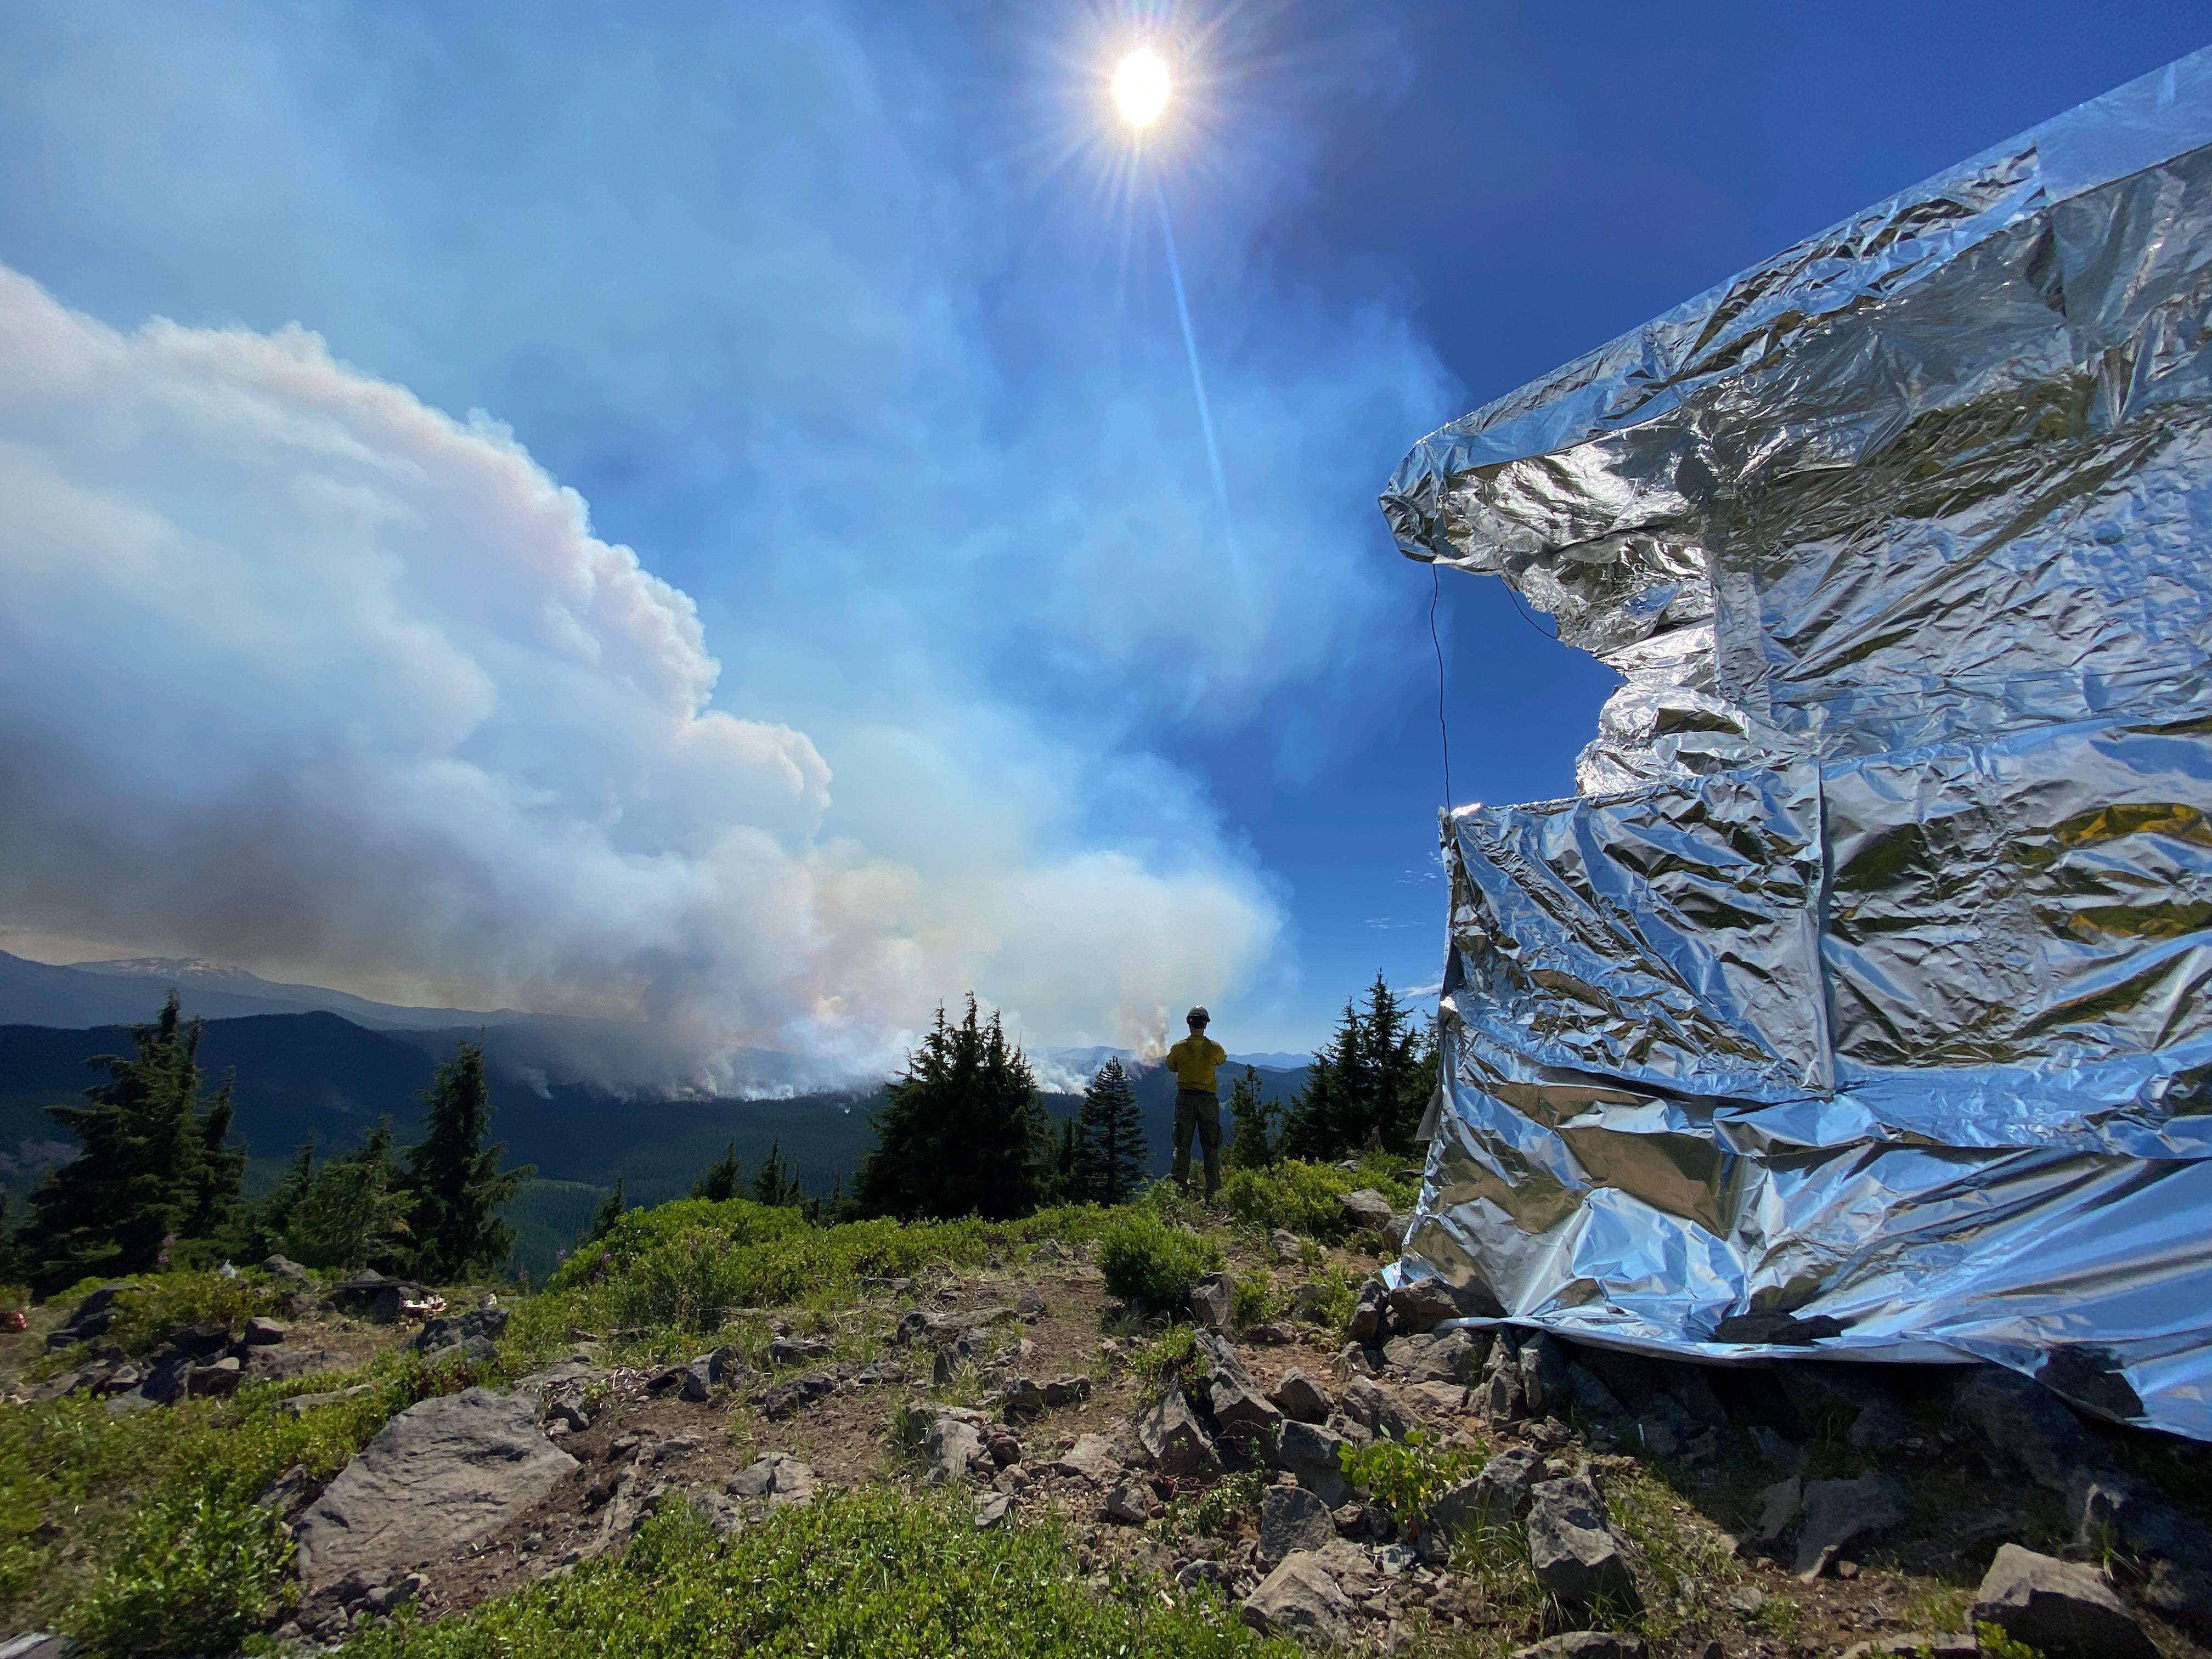 Waldo Mountain Lookout can be seen in the left corner of the frame with a reflective, aluminum wrap. A firefighter stands in center frame looking to the Southwest at the smoke being produced by the Cedar Creek Fire.